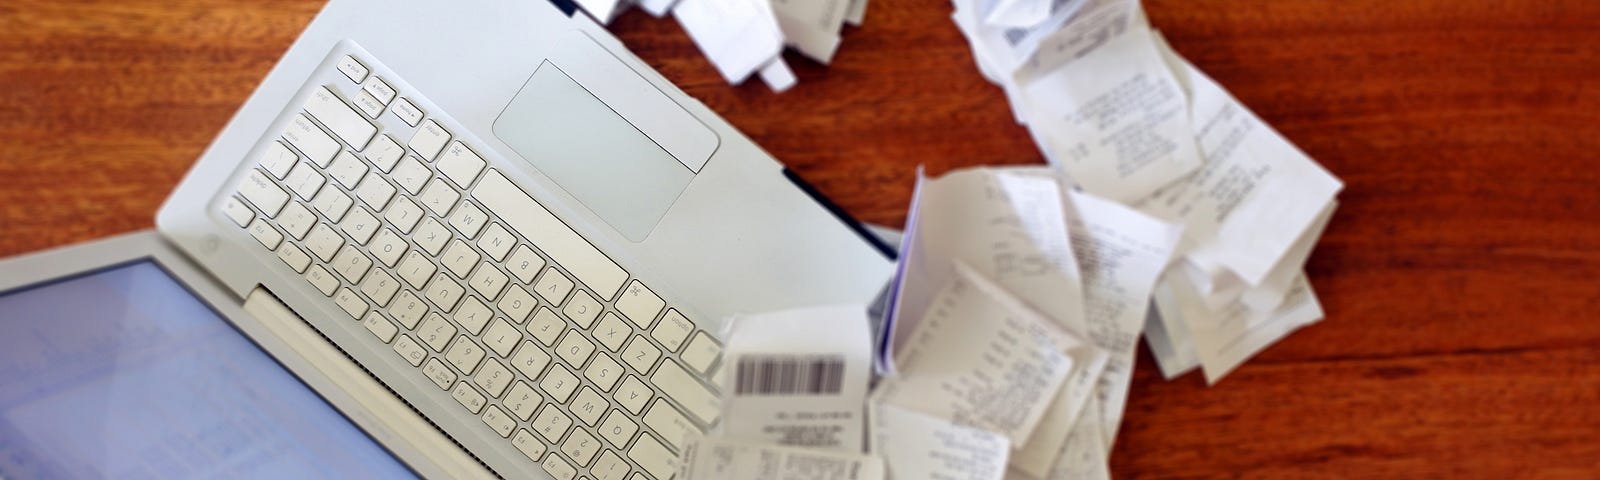 An open laptop surrounded by piles of receipts.